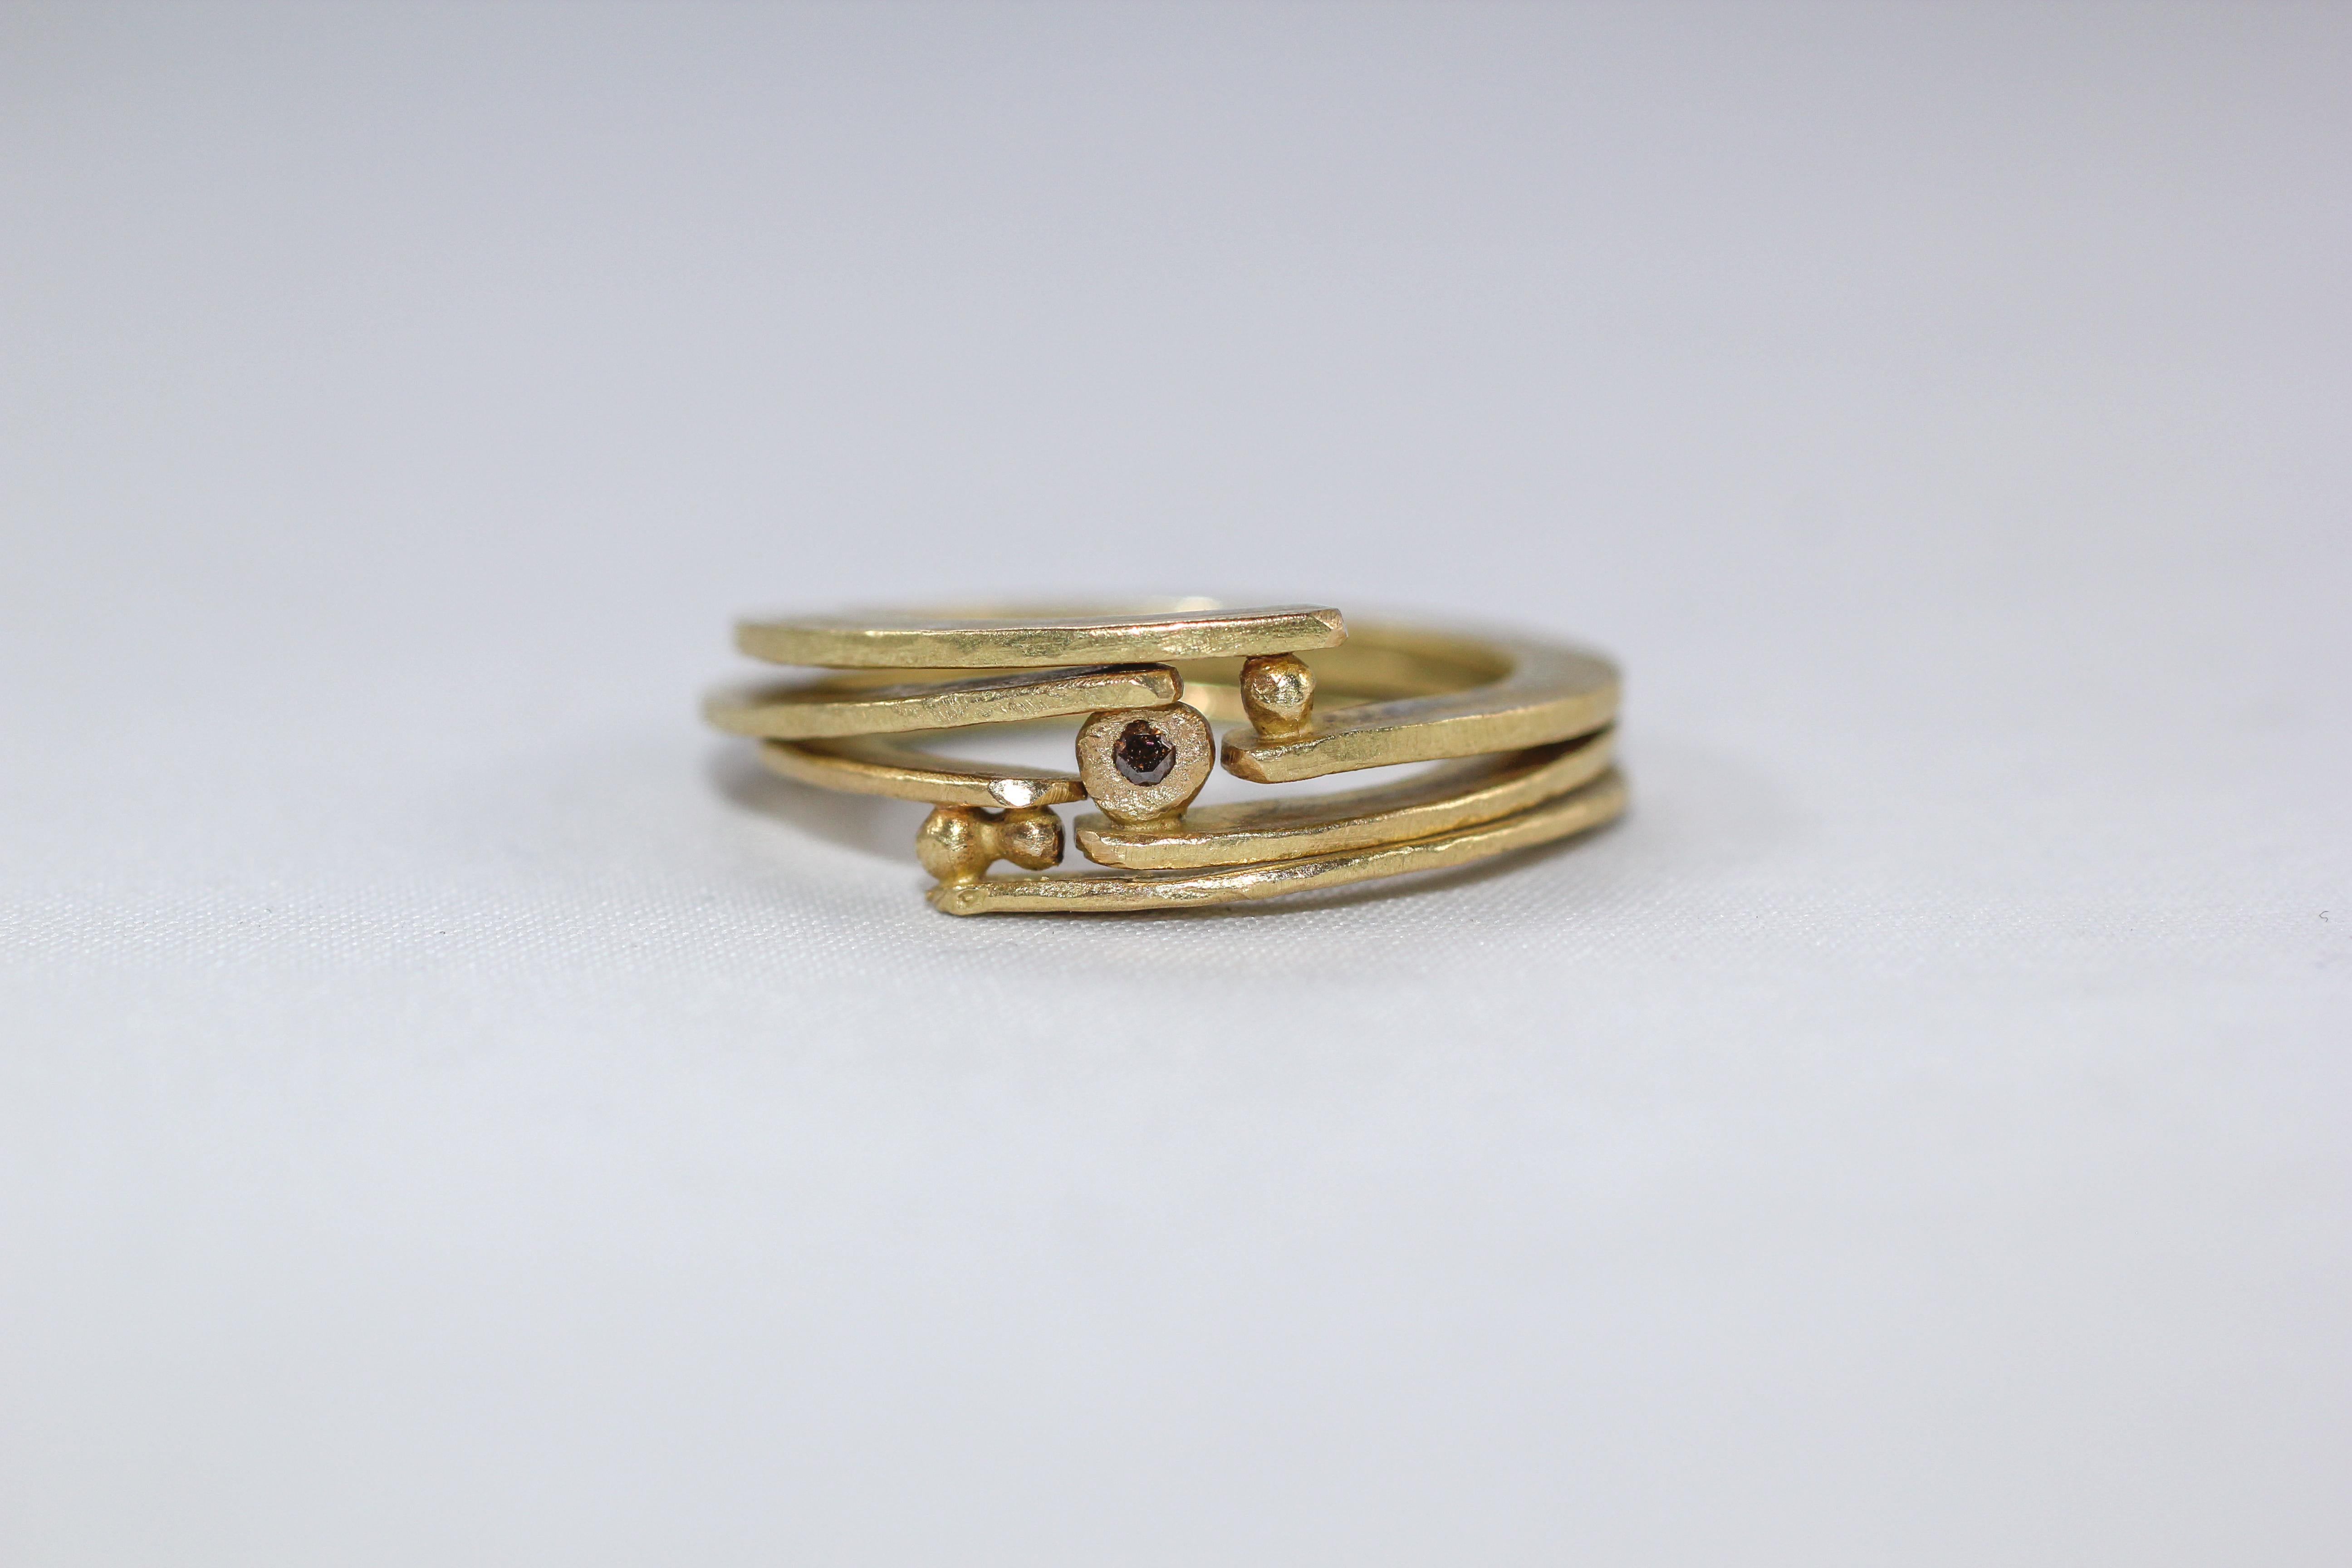 Bridal wedding band ring. Brown diamond set in 18K Gold. Simplicity With A Twist ring design. 
Pictured for sale a stack of three rings: Holding One granule, Two granules, Holding a diamond.

These striking bridal wedding band rings are first